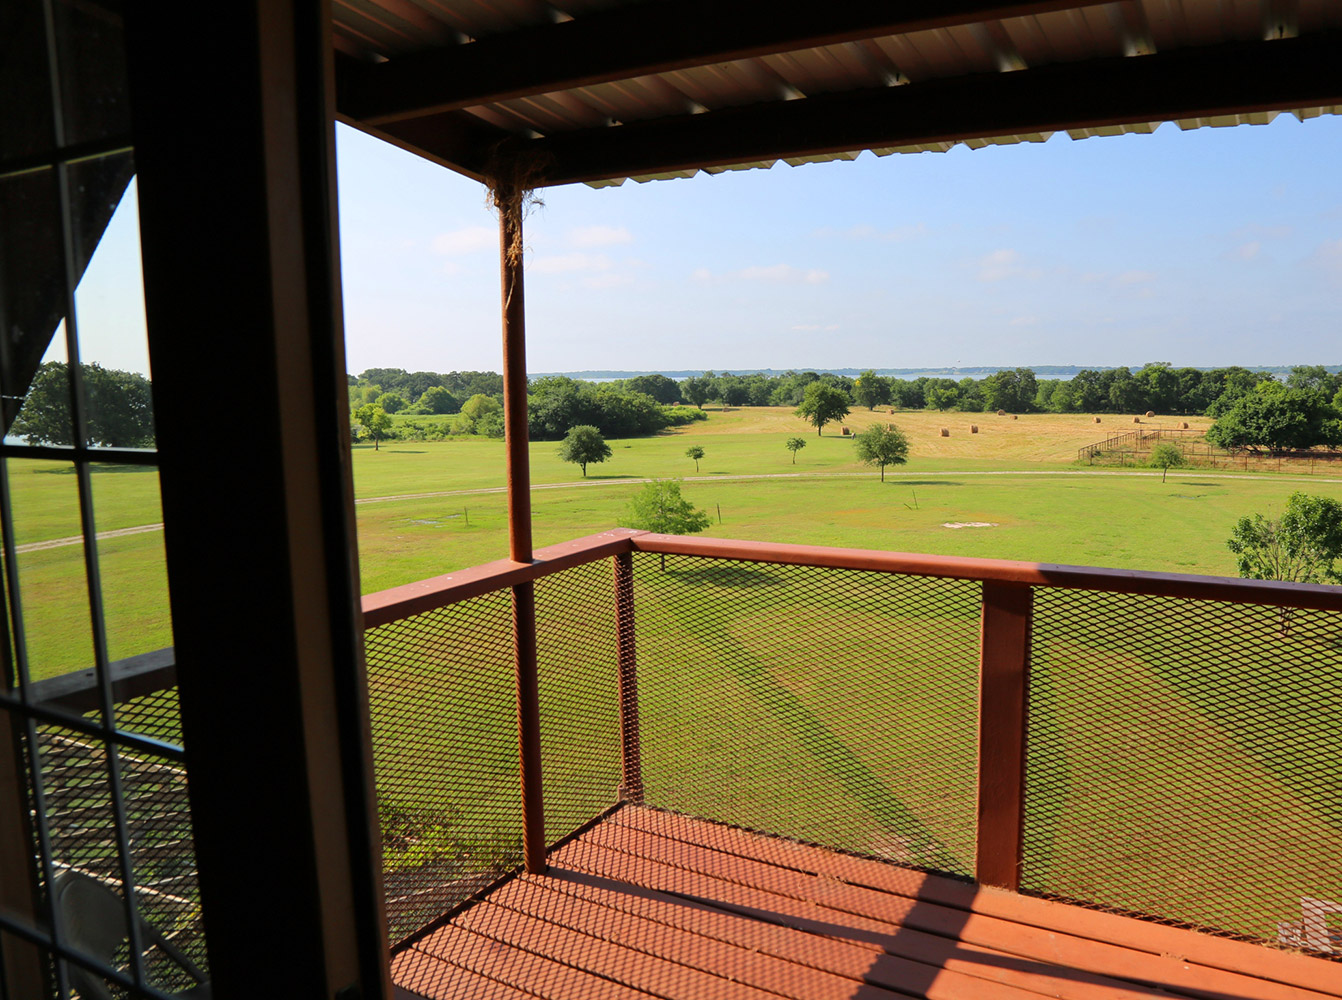 porch area overlooking the ranch